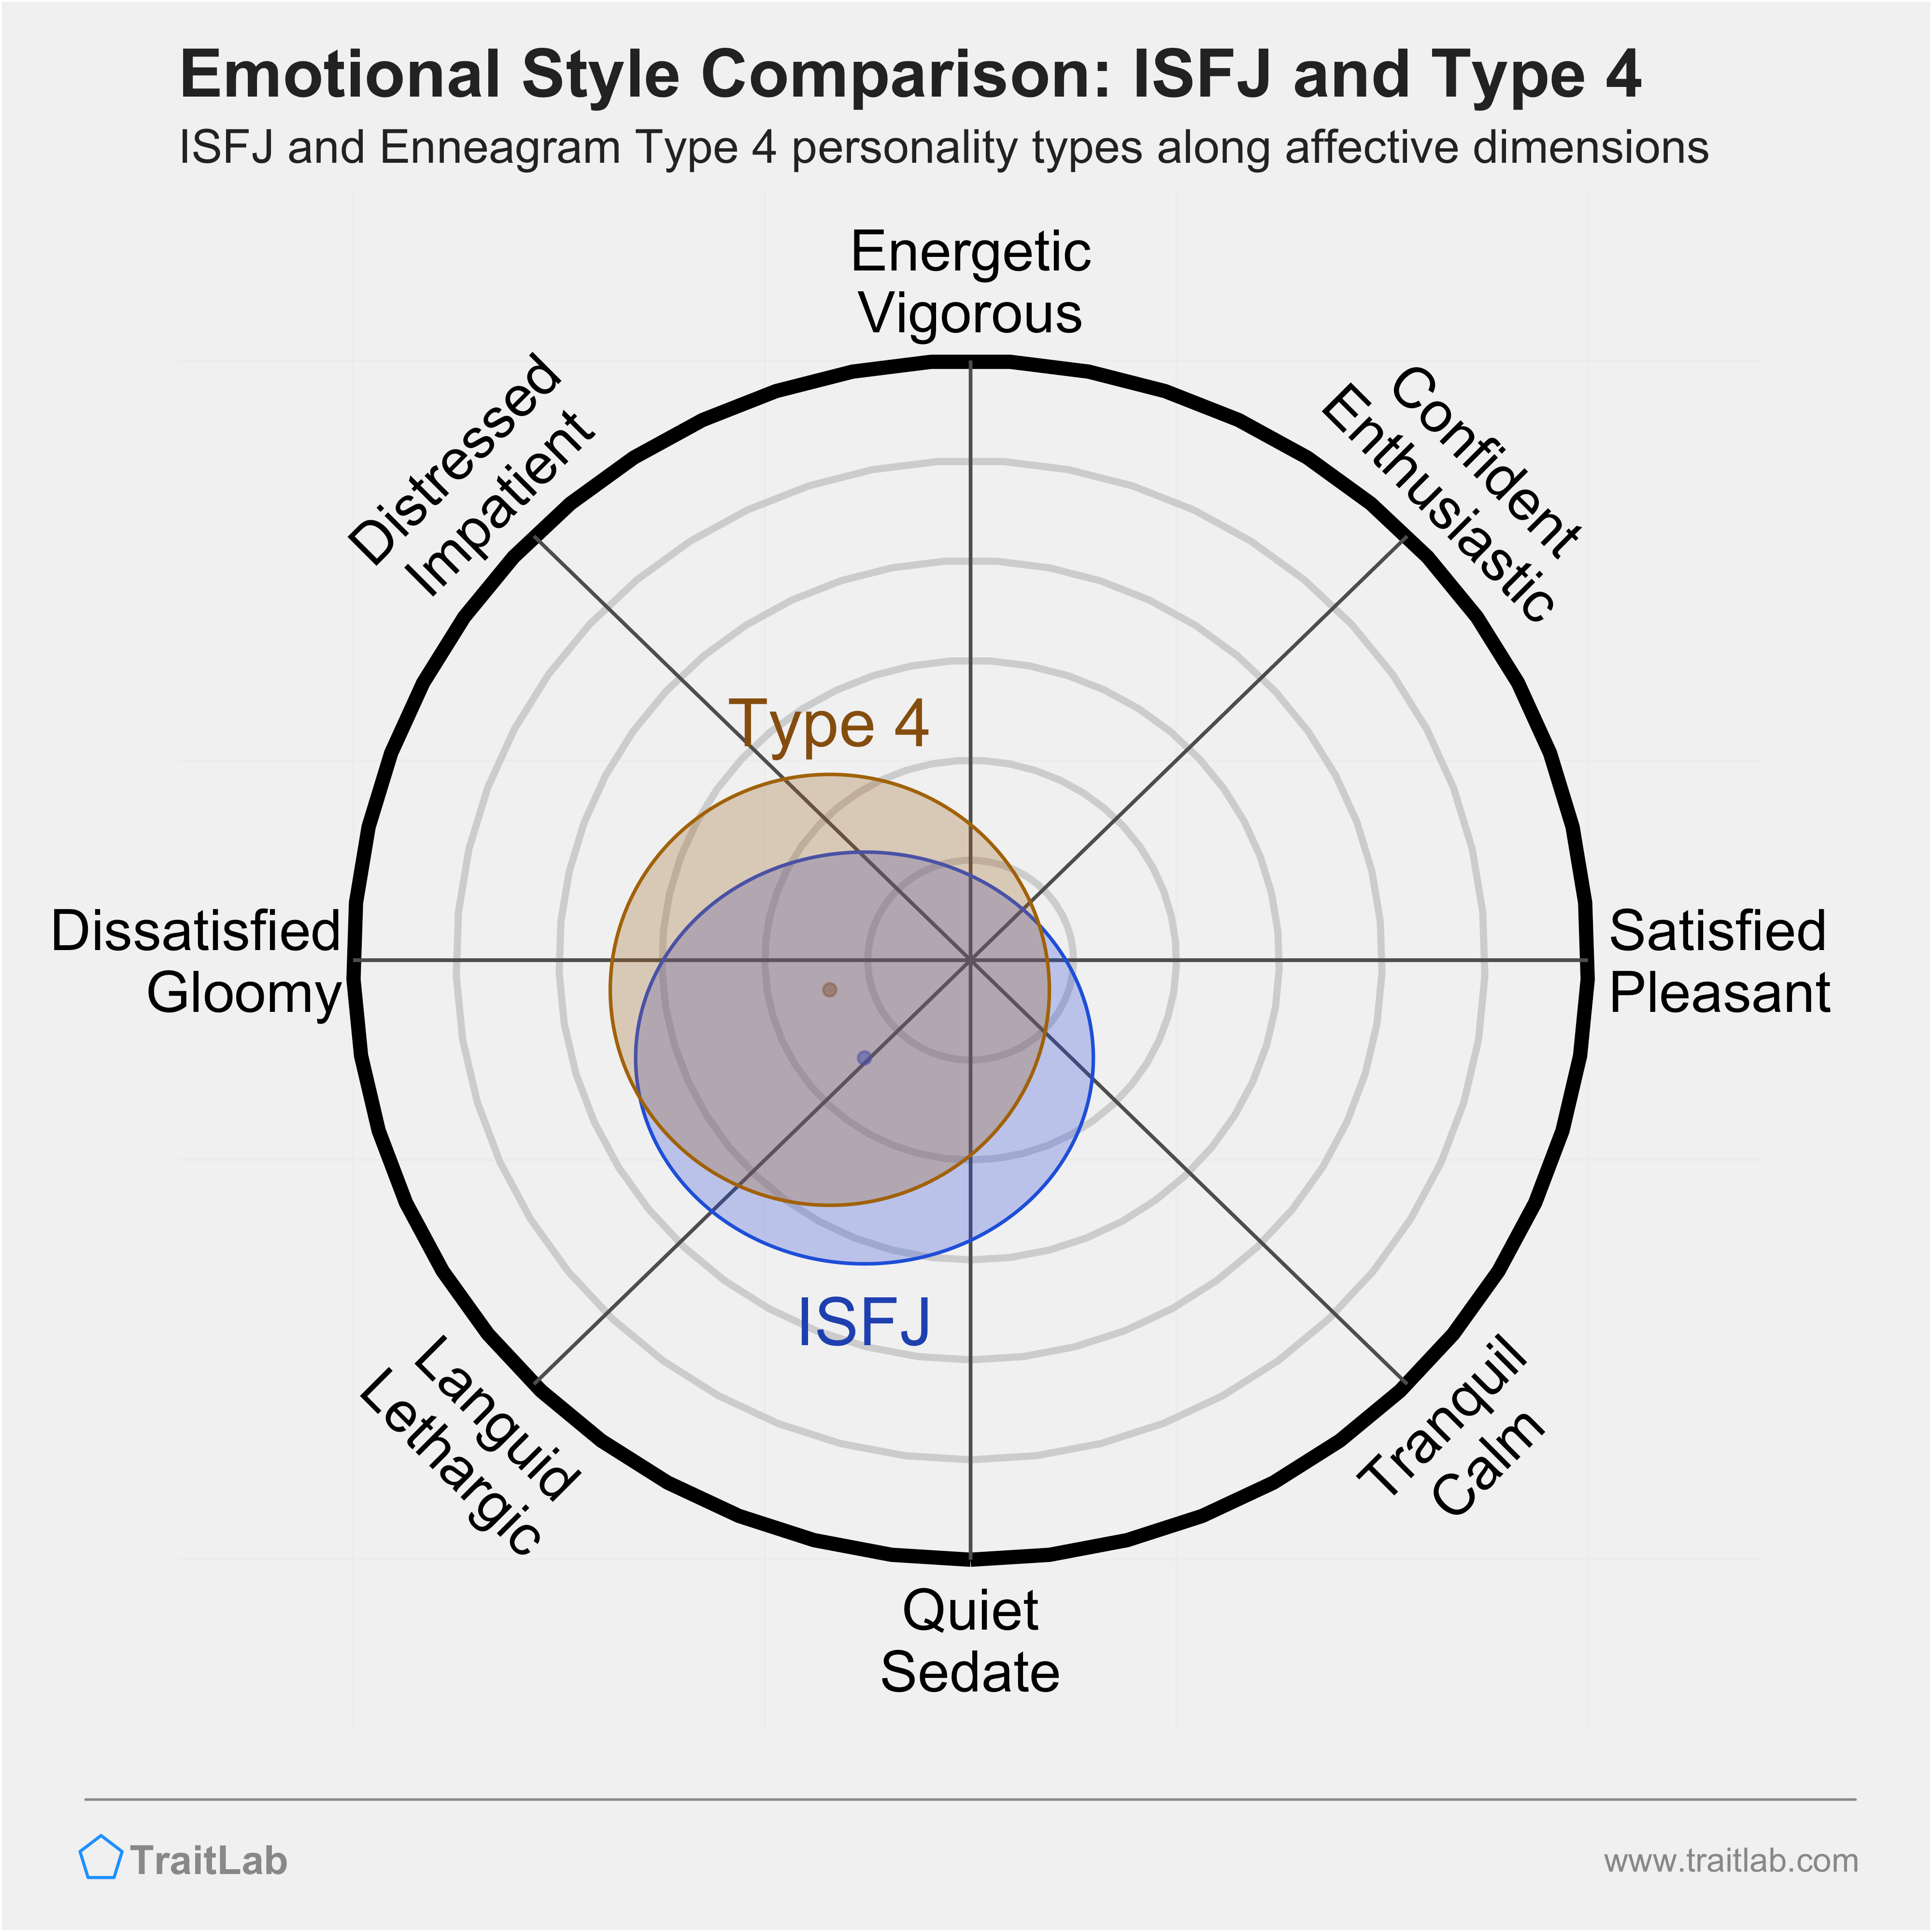 ISFJ and Type 4 comparison across emotional (affective) dimensions